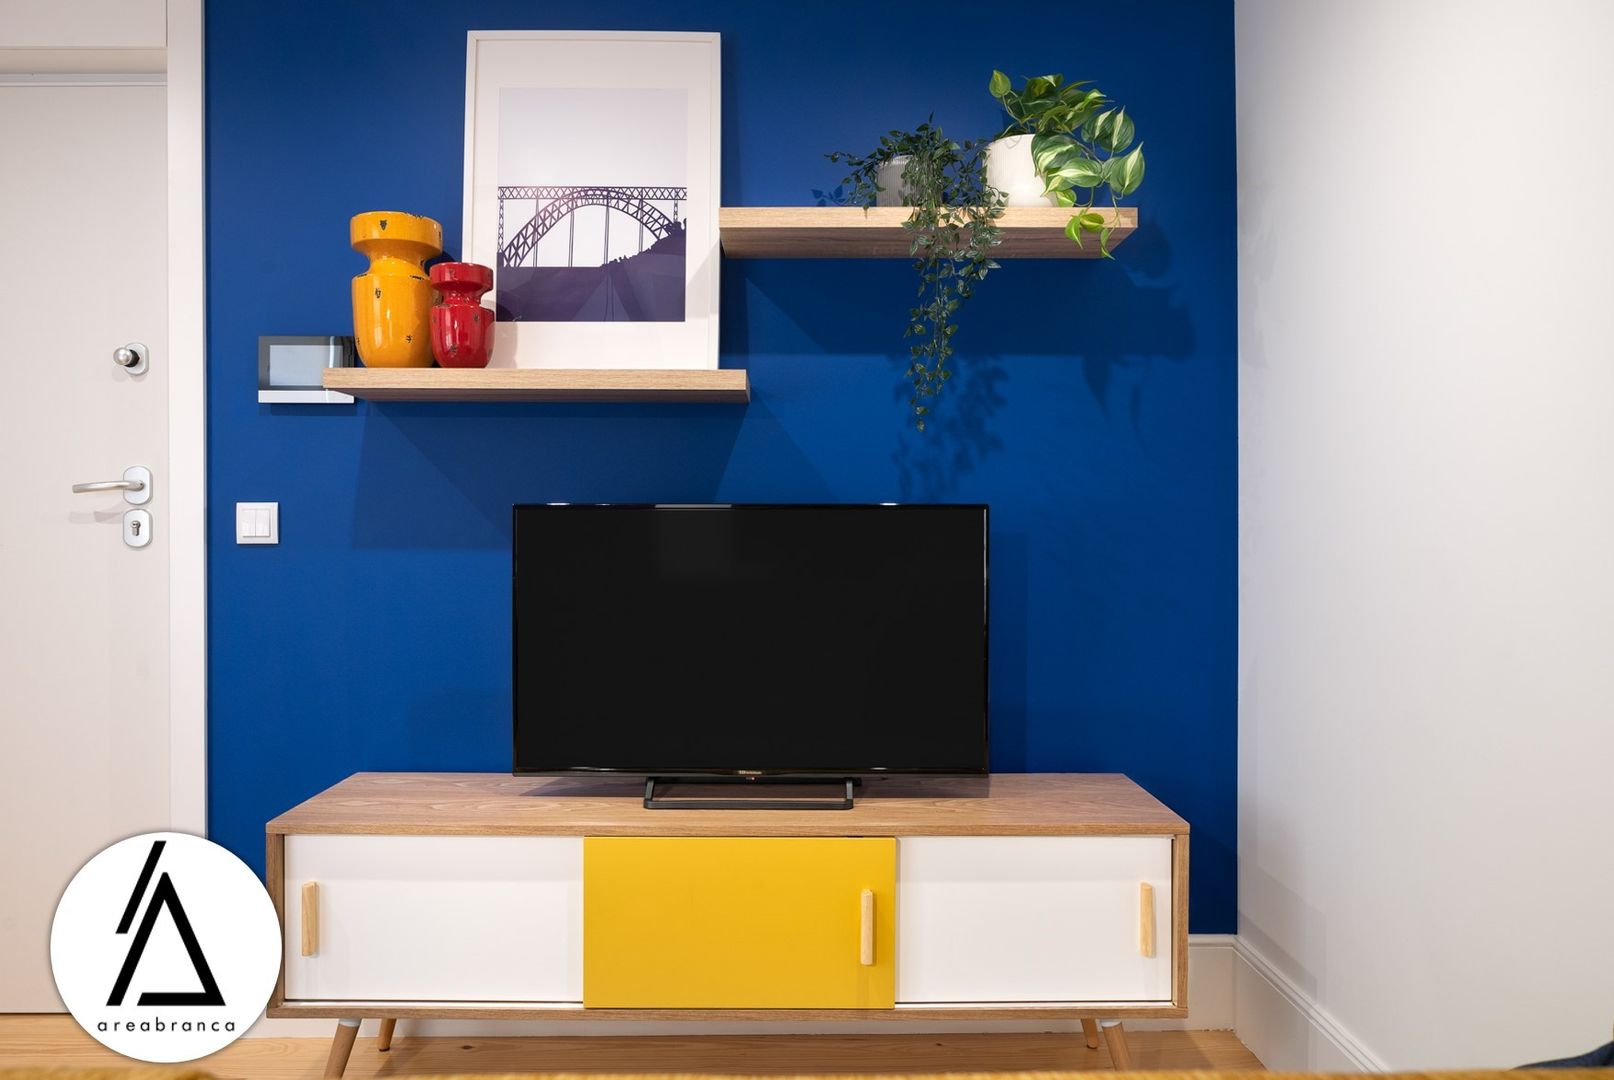 Apartamento 1 ON, Areabranca Areabranca Living room TV stands & cabinets